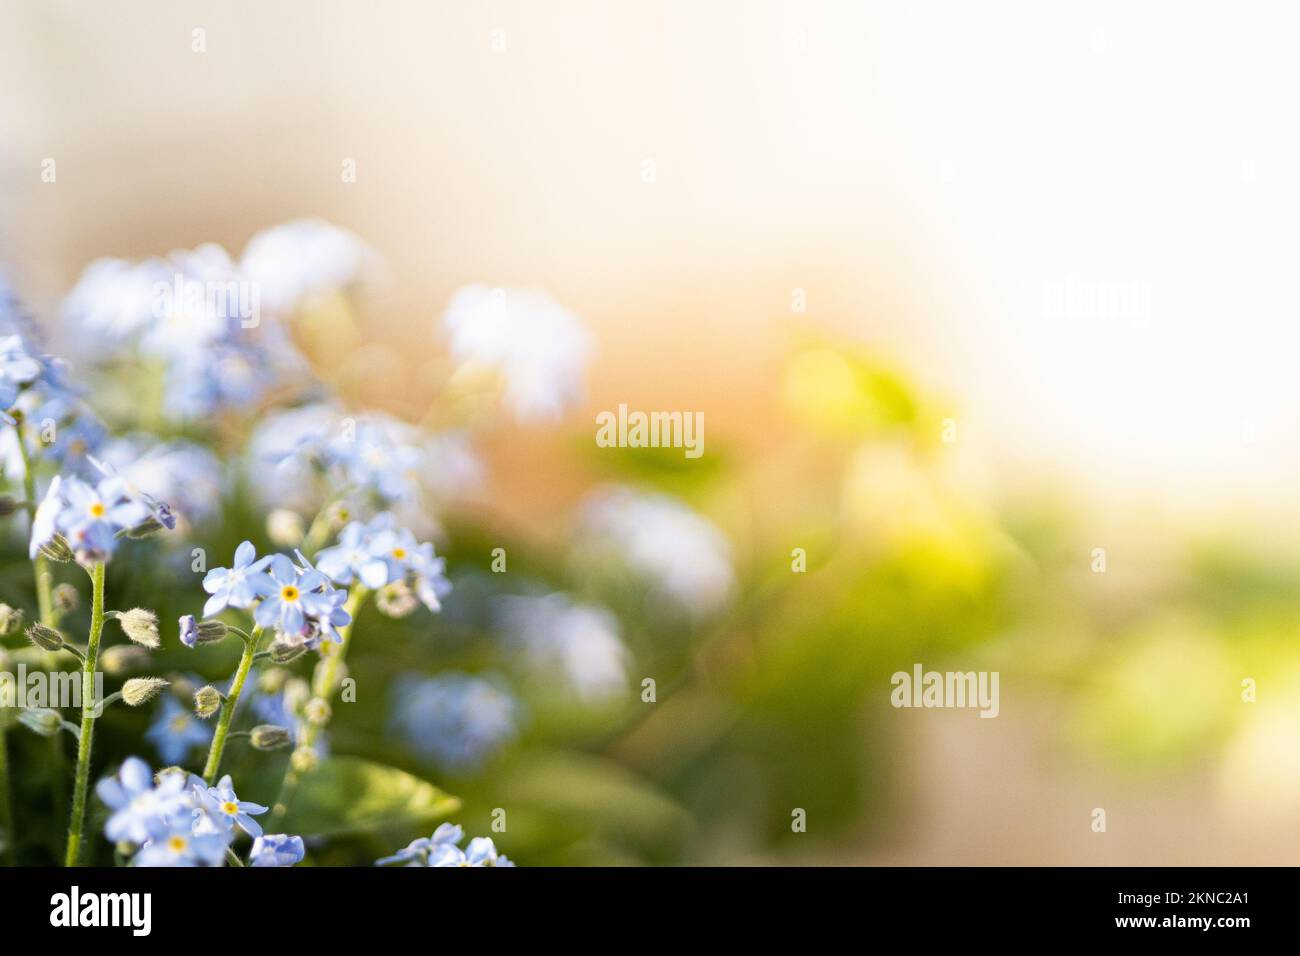 Blue forget-me-not flowers blooming under bright warm sun light Stock Photo